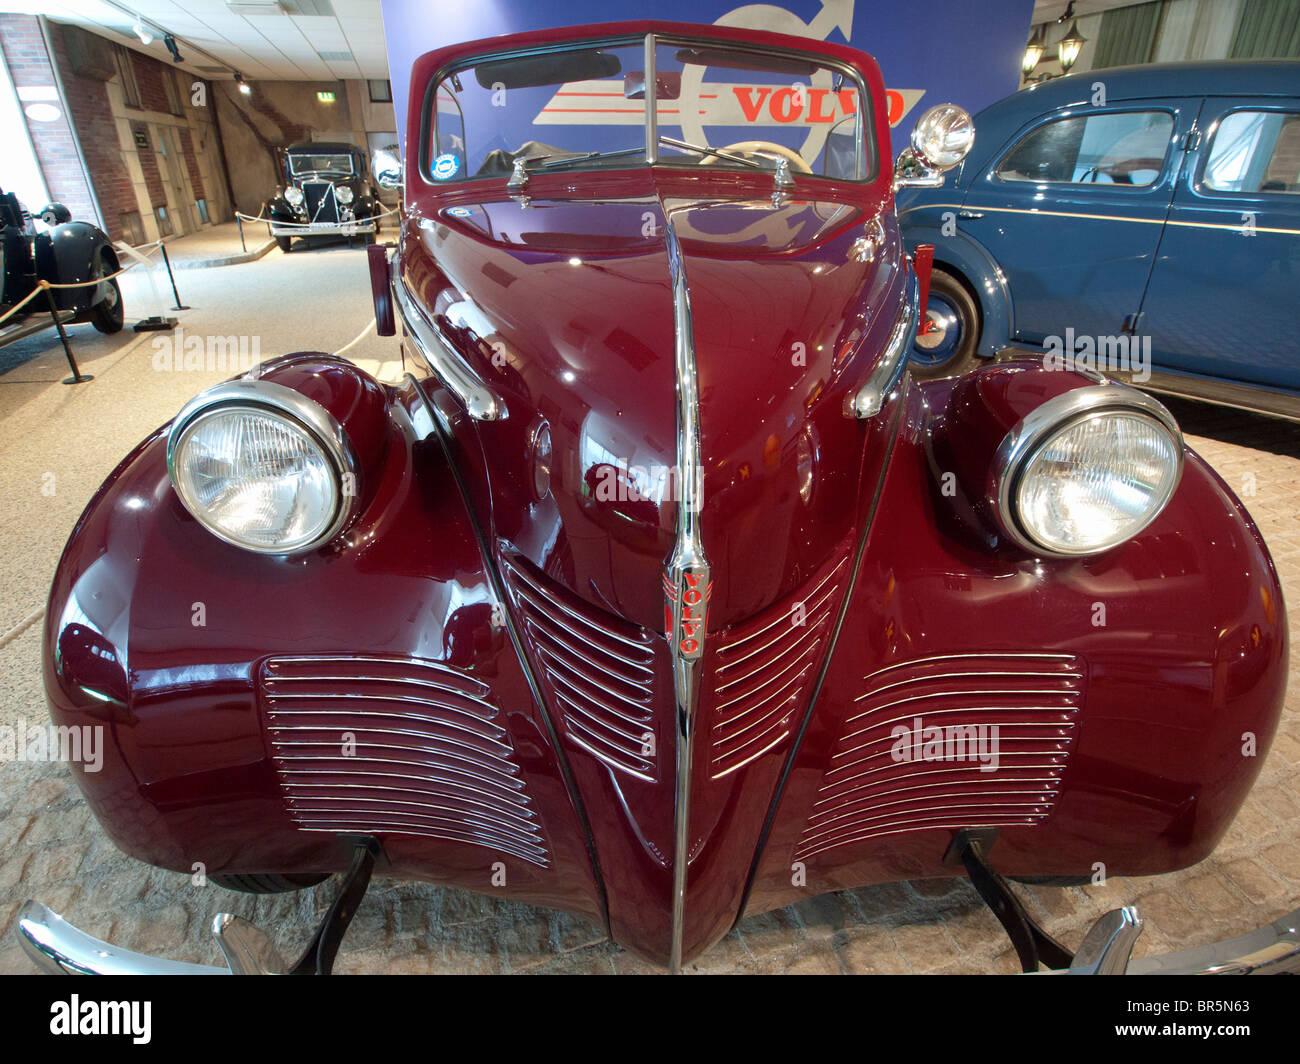 Vintage cars on display at the Volvo Museum at Arendal in Gothenburg Sweden Stock Photo